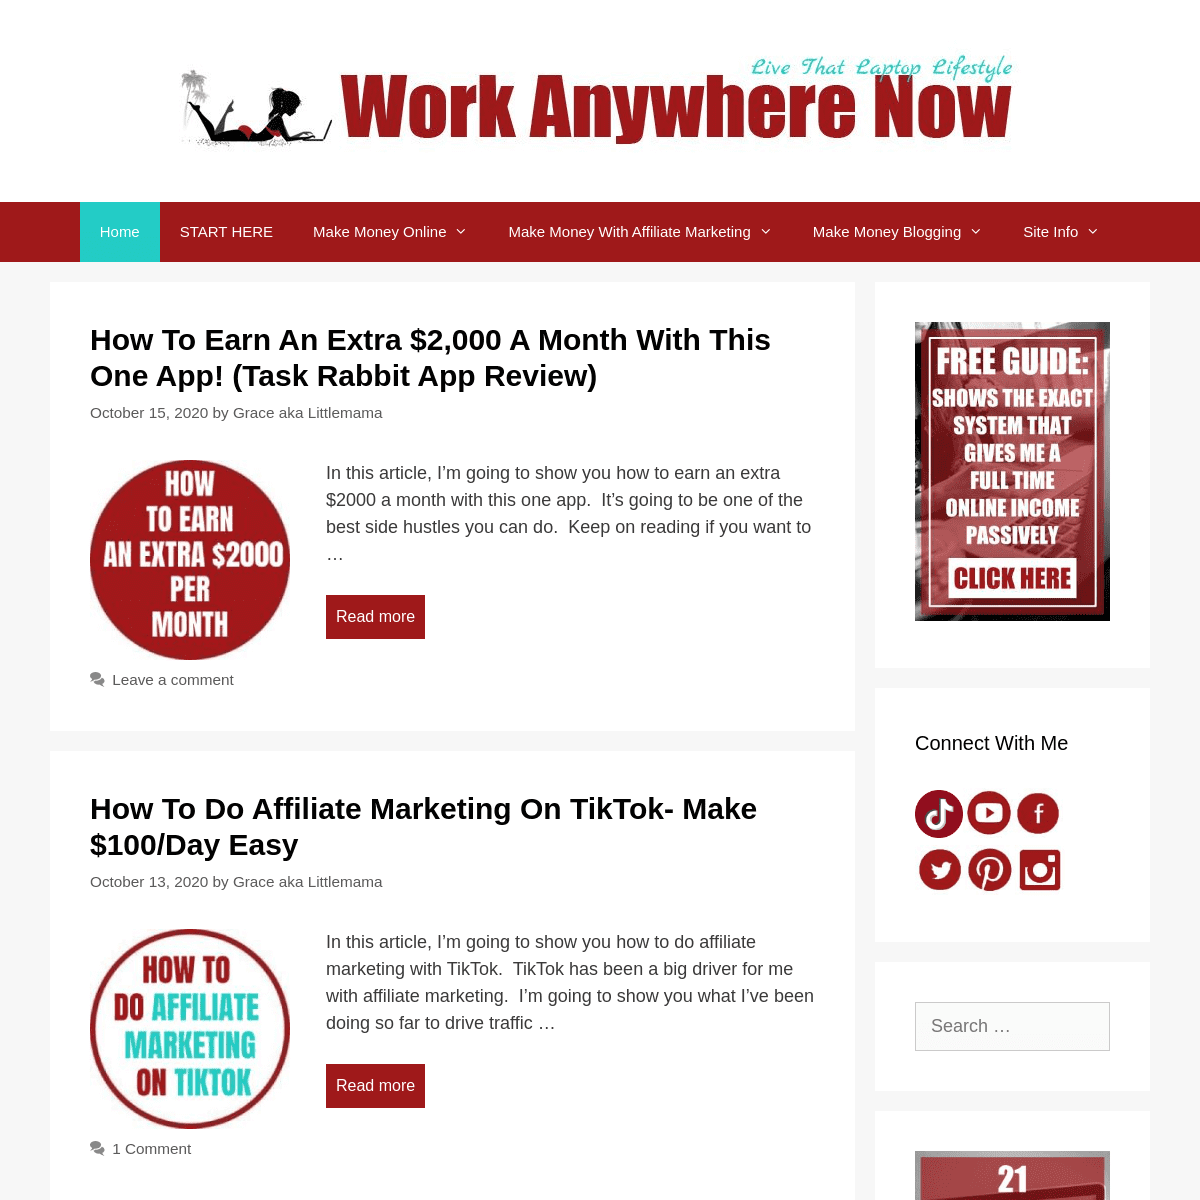 A complete backup of https://workanywherenow.com